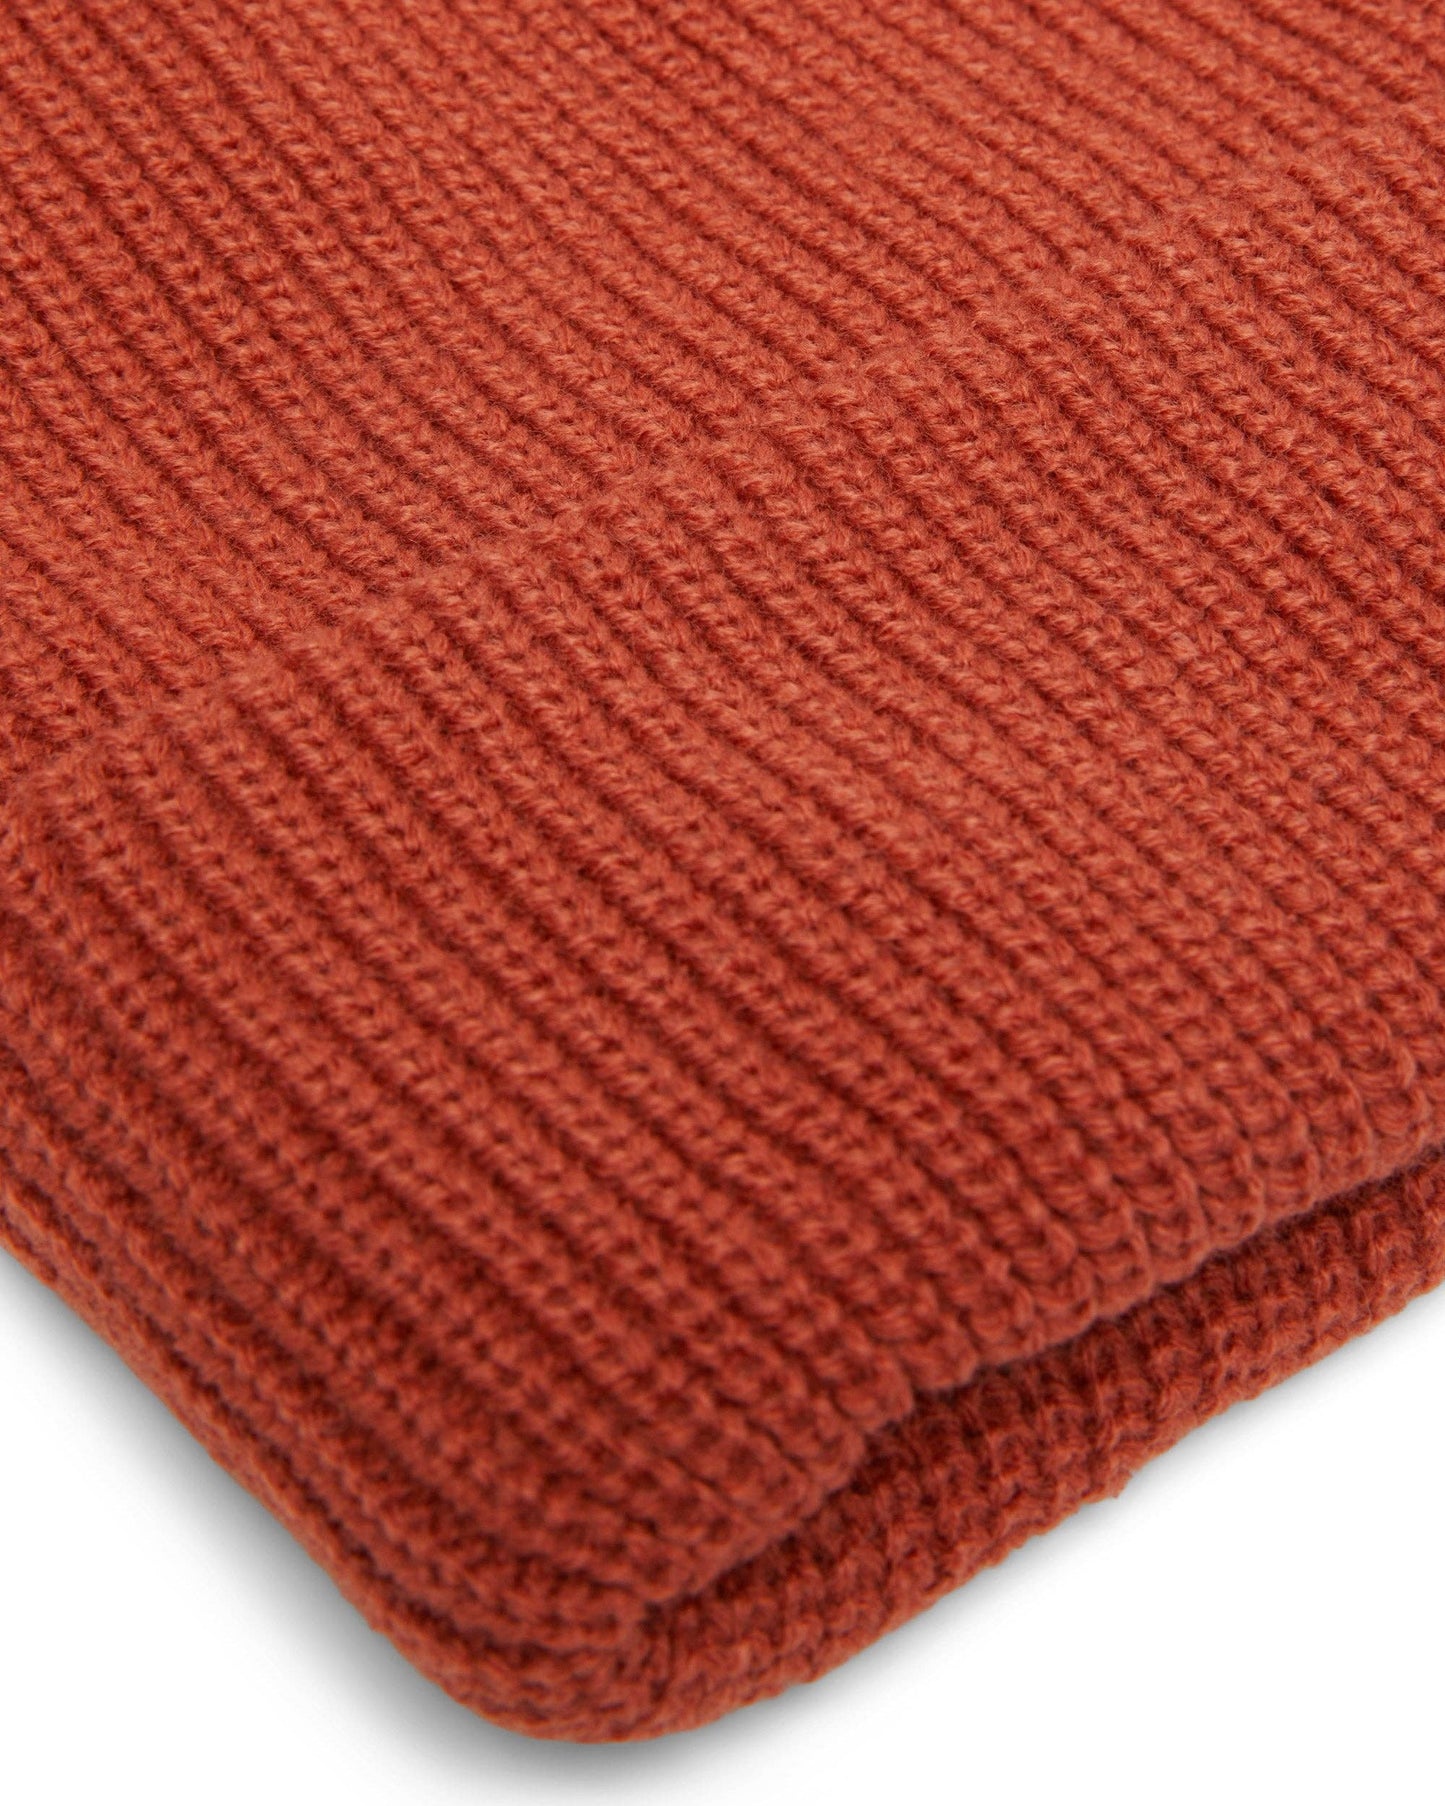 'YOU ARE ON NATIVE LAND' RIBBED BEANIE - REDWOOD